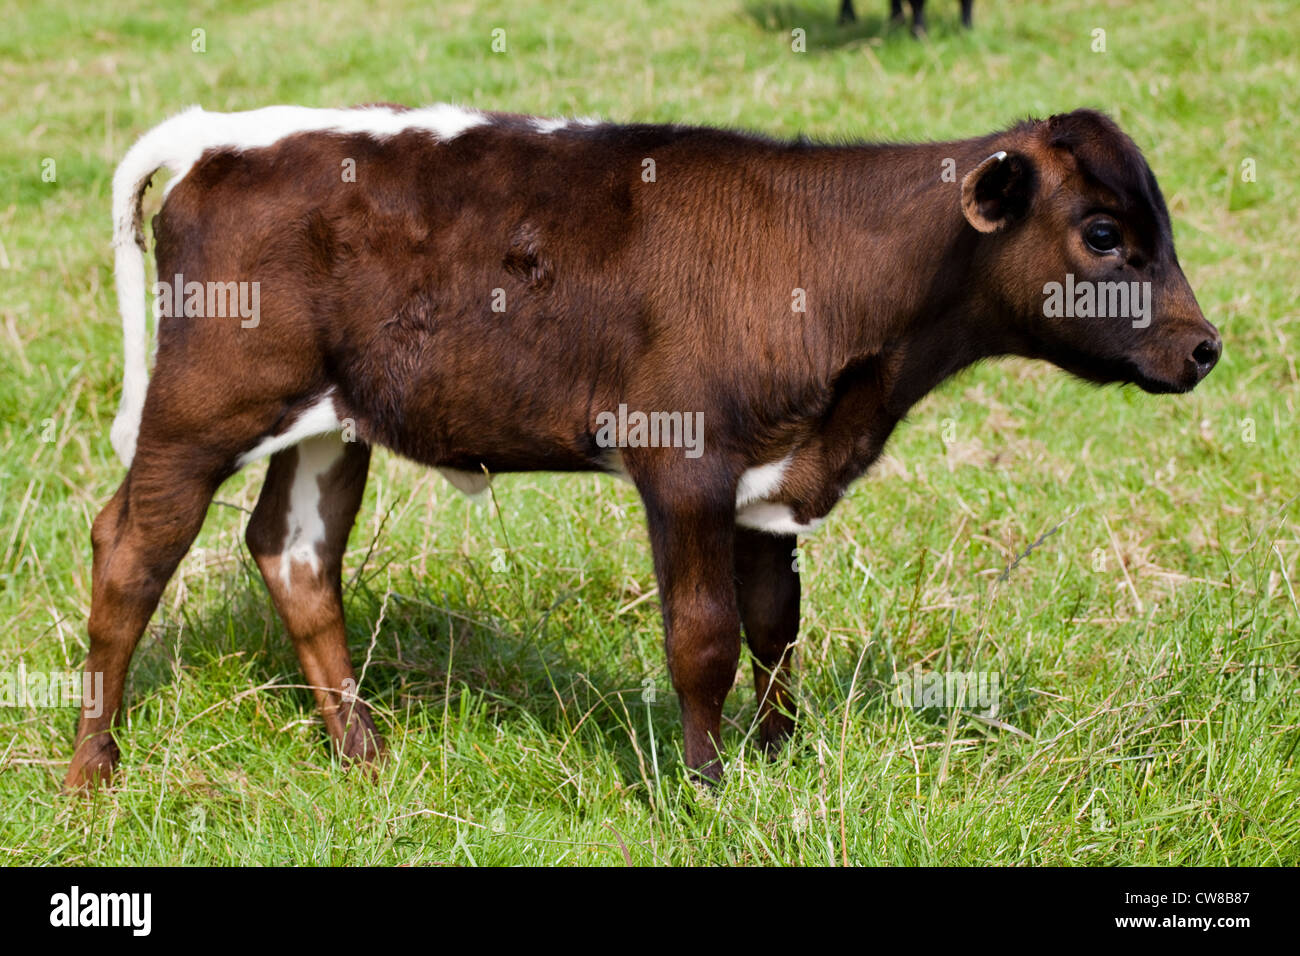 Gloucester (Bos taurus). Calf. Norfolk. Mahogany colour type and showing the typical markings of the breed; white rump and tail. Stock Photo